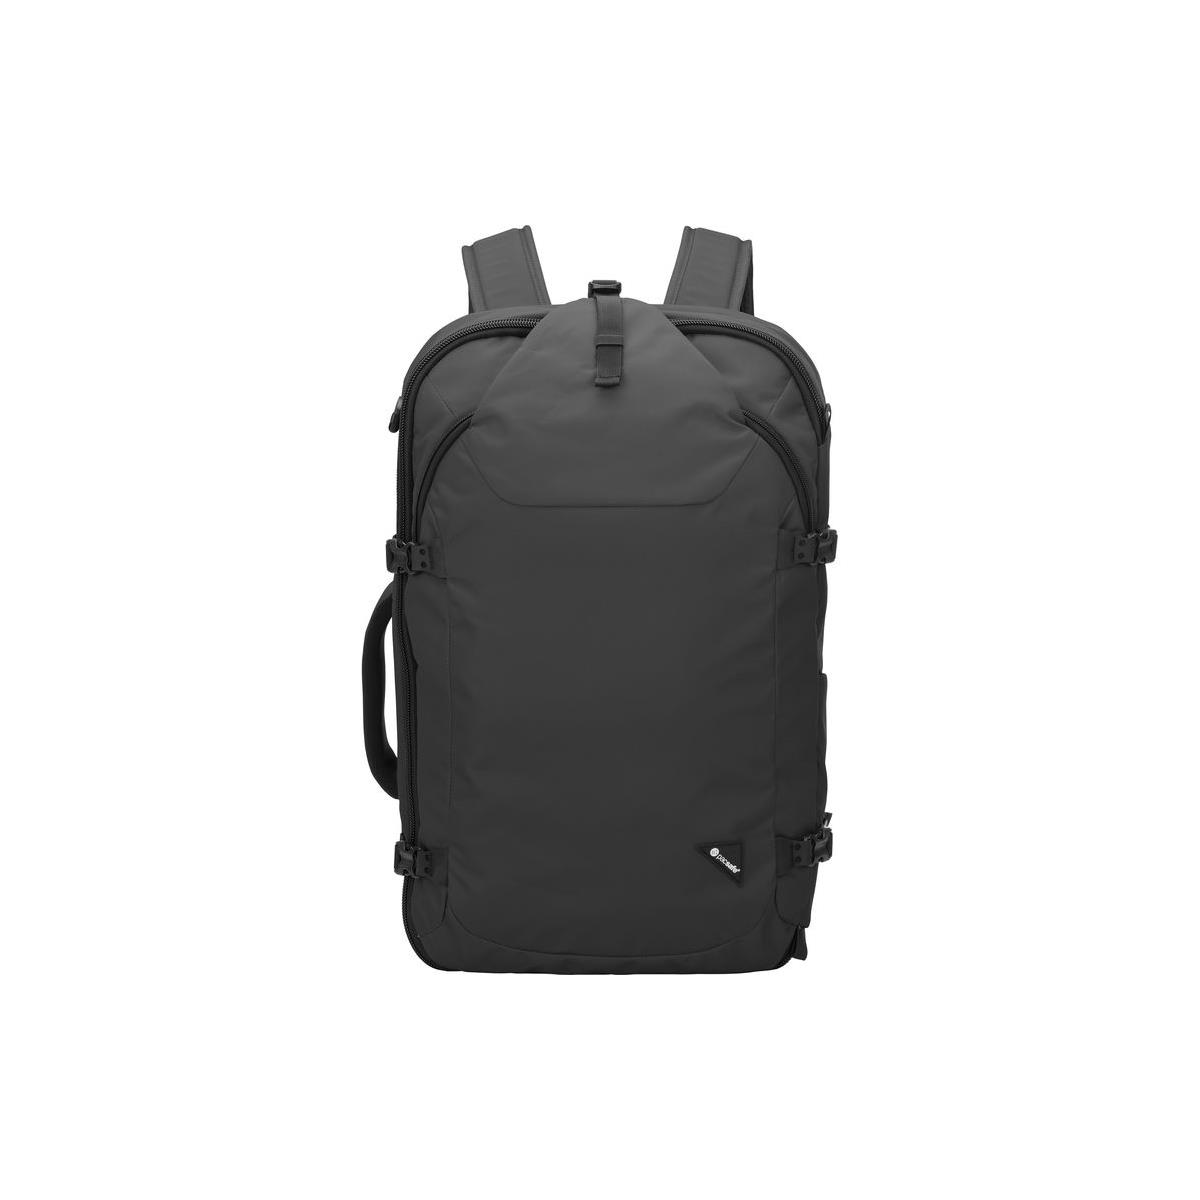 Image of Pacsafe Venturesafe EXP45 Anti-Theft 45L Carry-On Travel Backpack